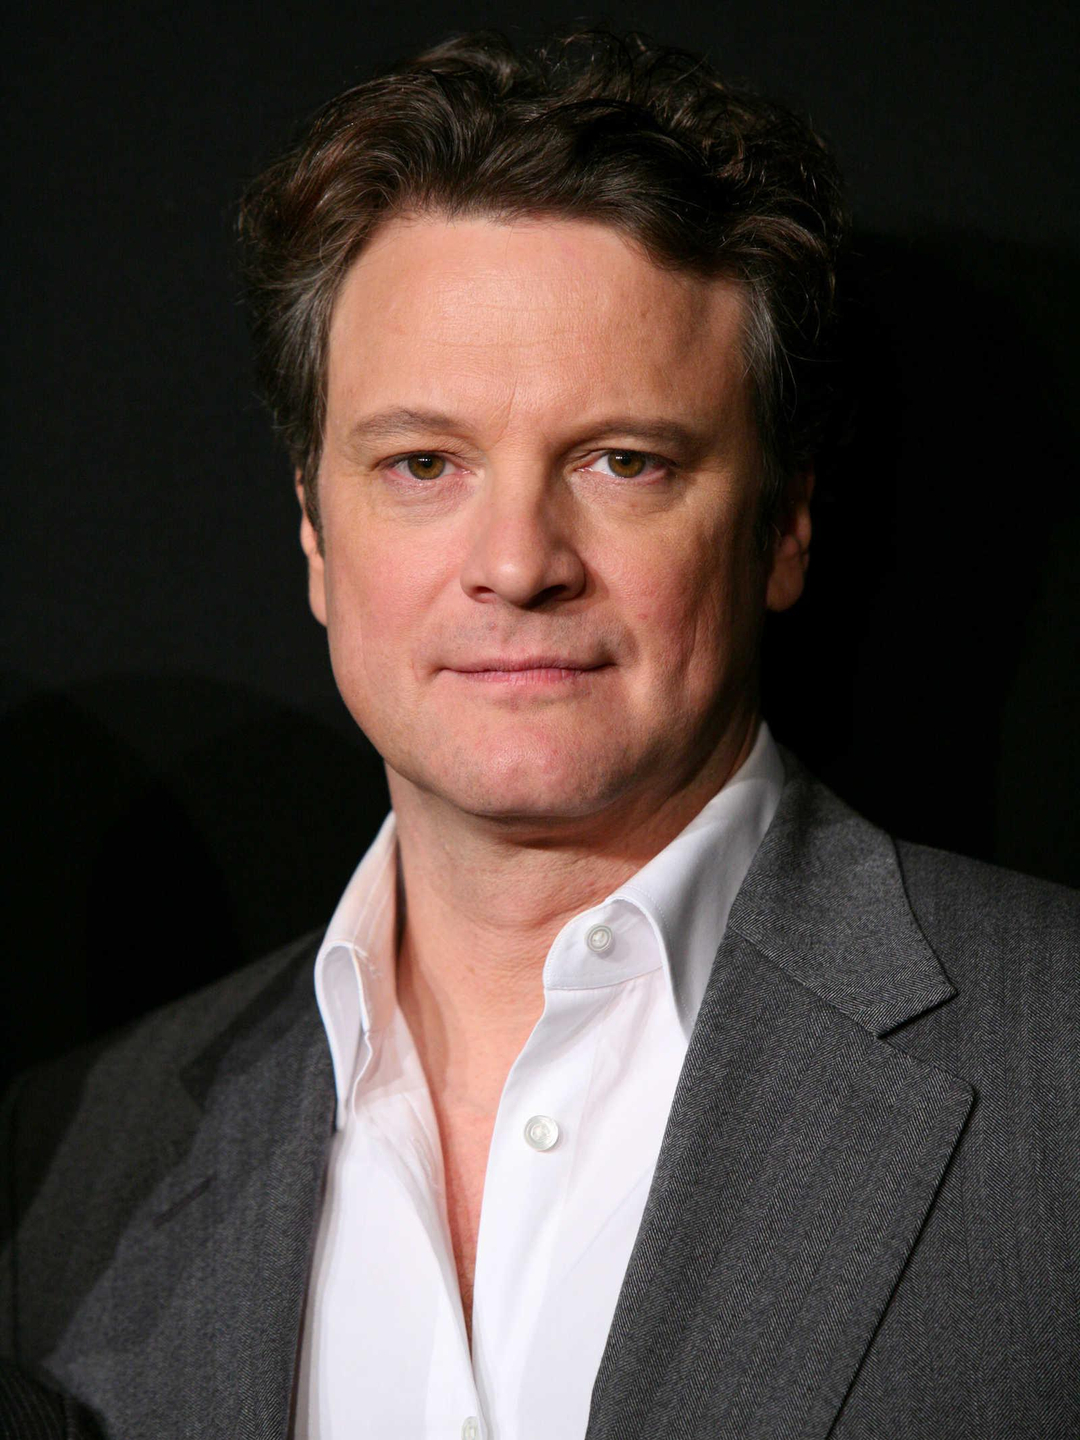 Colin Firth appearance